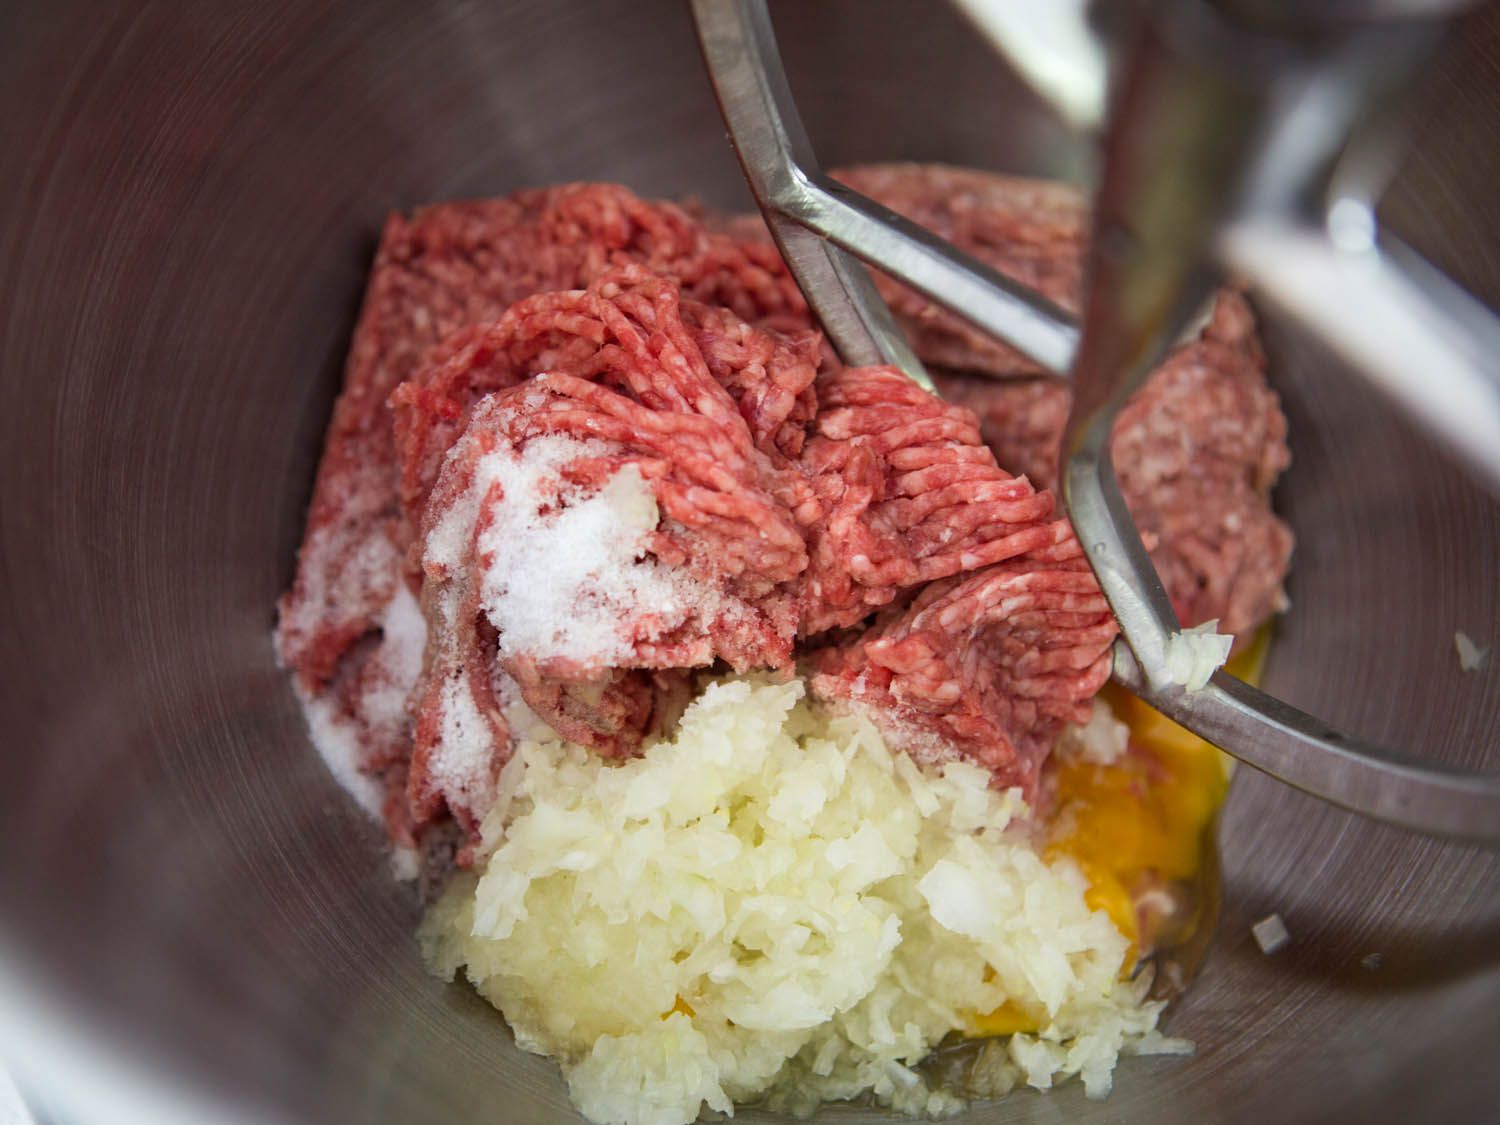 Raw ground beef, pork, salt, eggs, and minced onion in a stand mixer for Swedish meatballs.